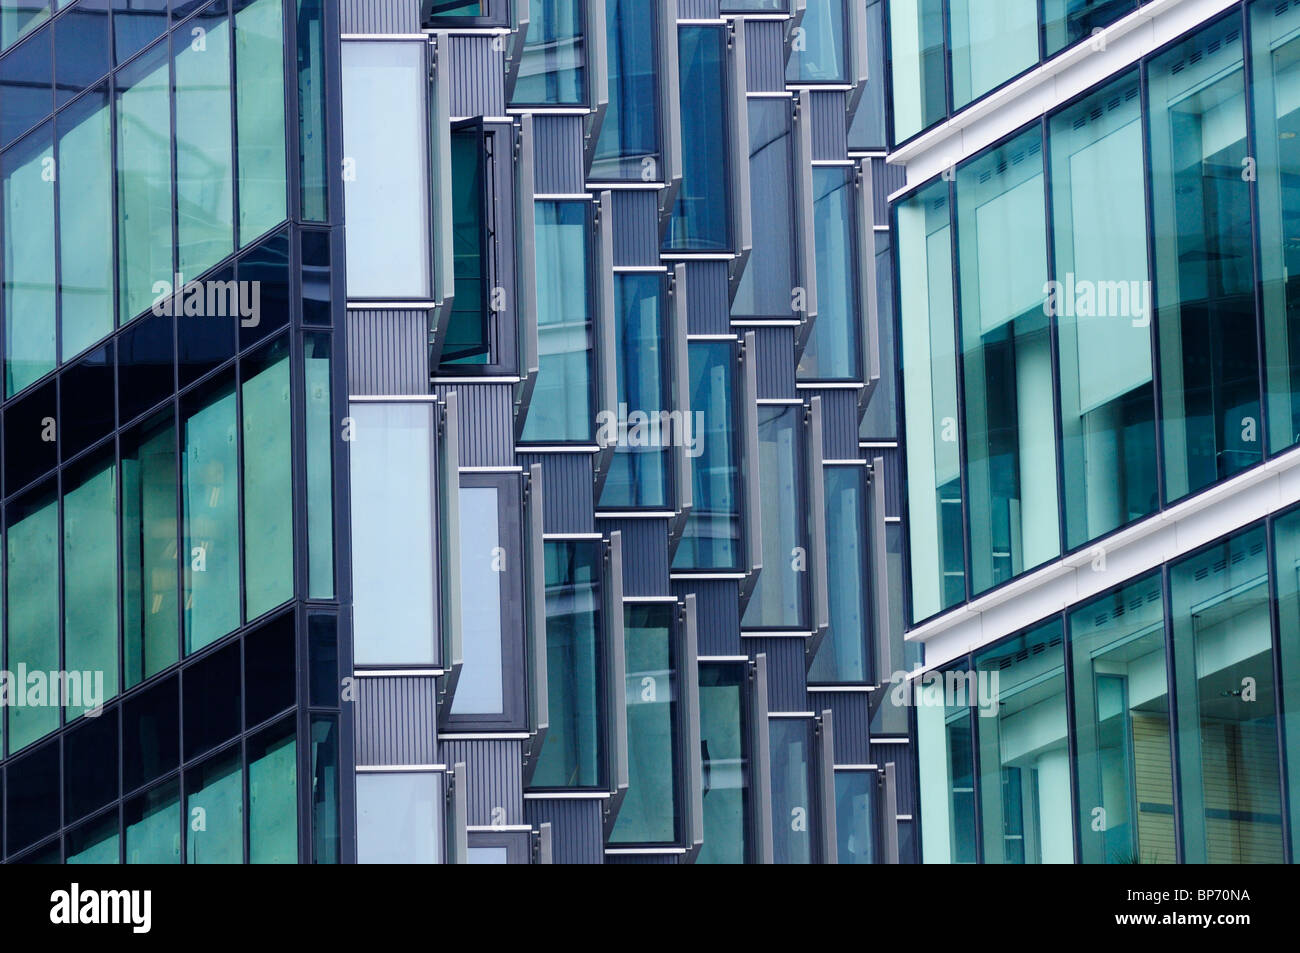 Abstract detail of office buildings, More London Riverside, London, England, UK Stock Photo